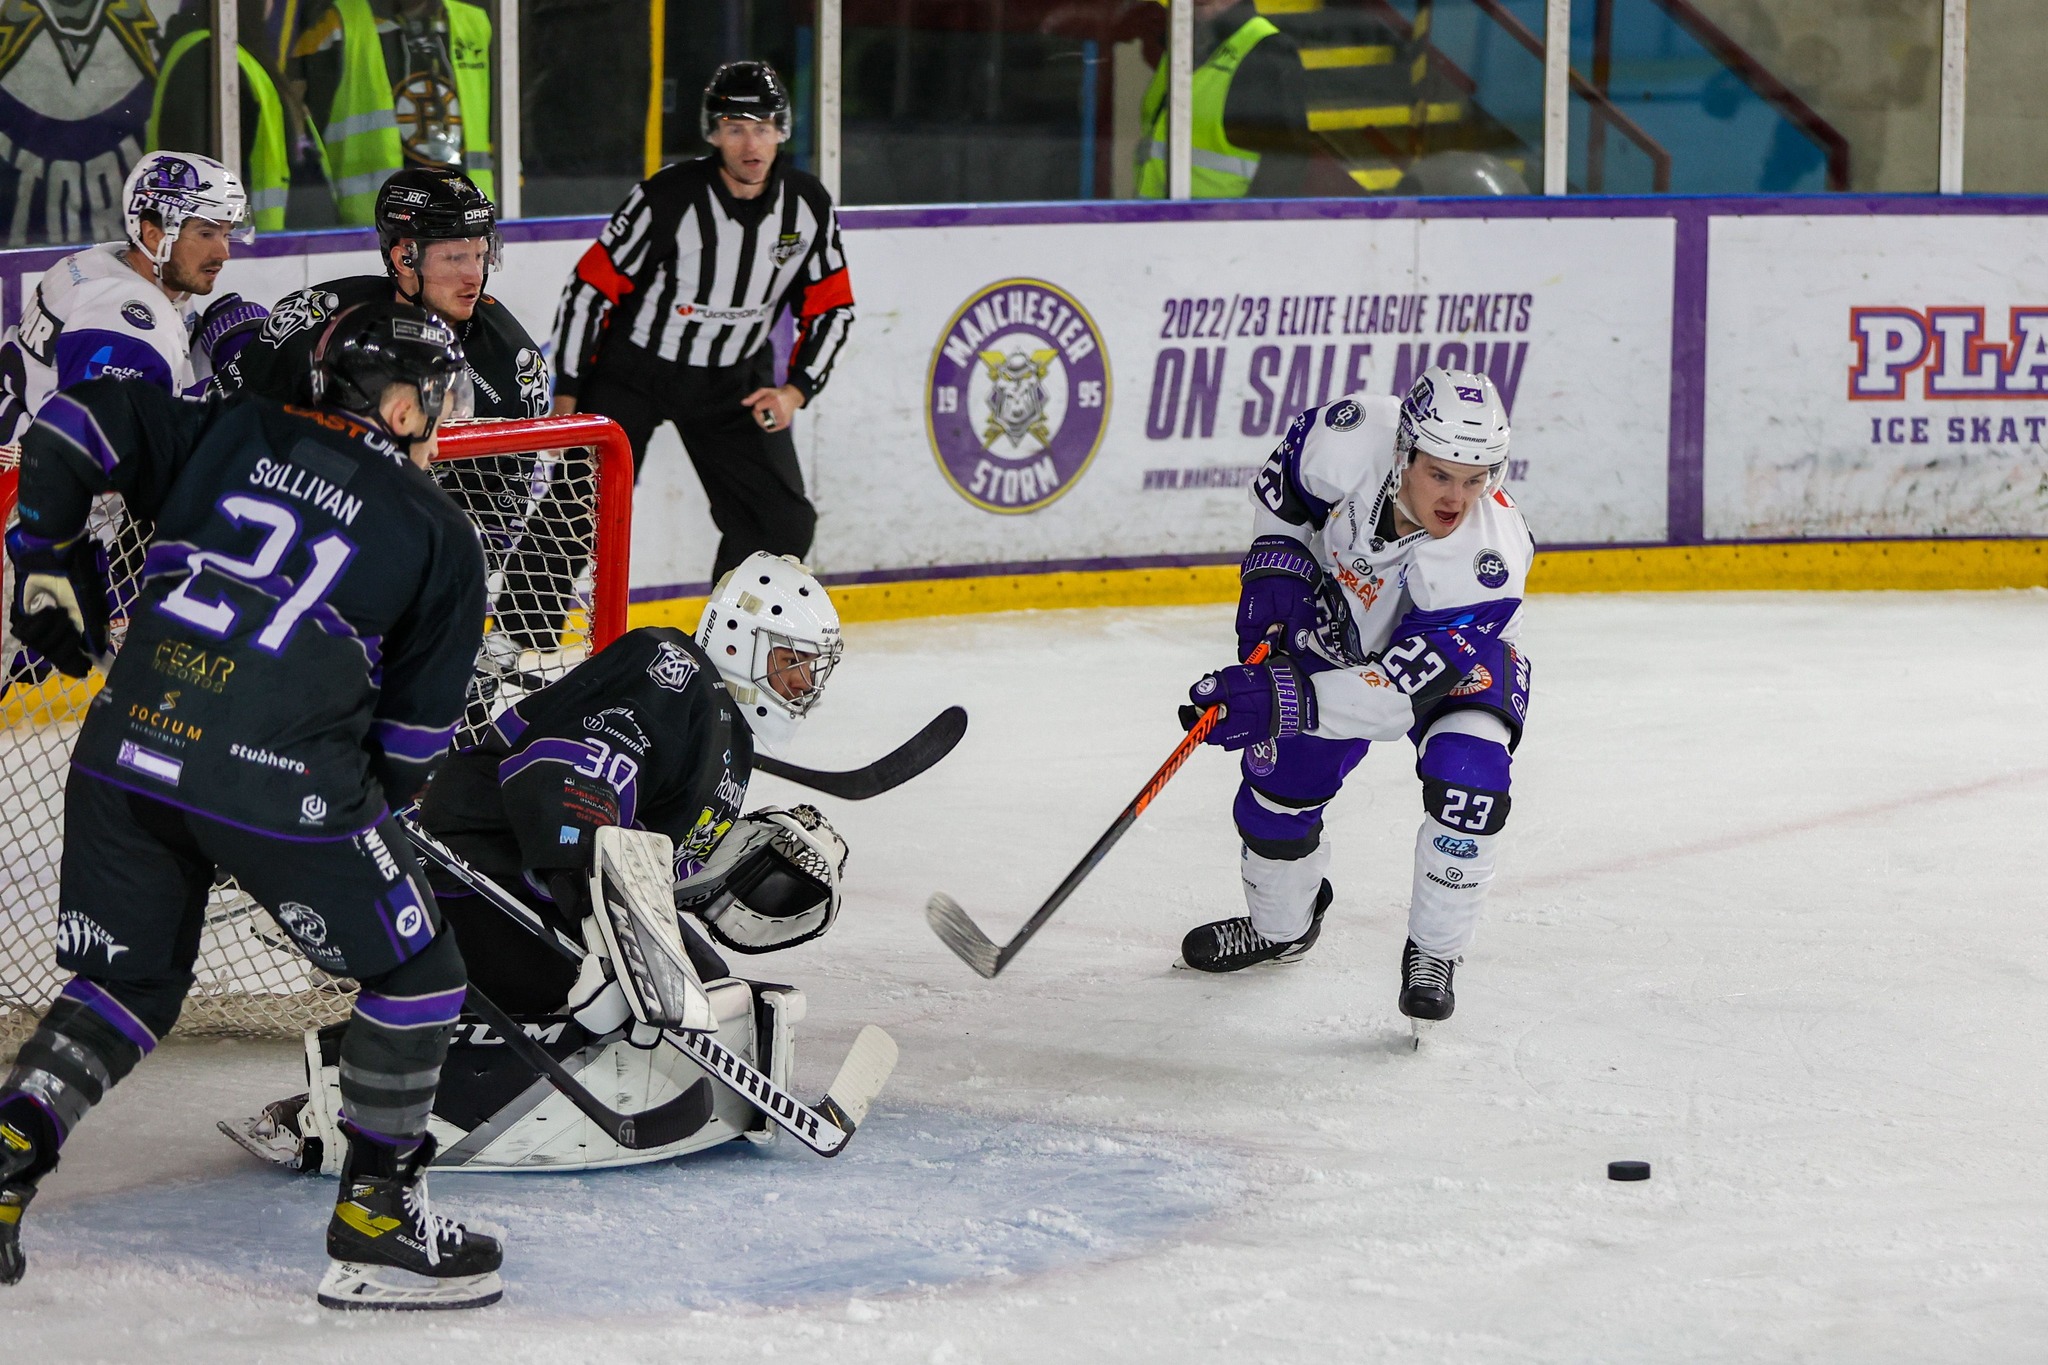 Glasgow Clan ice hockey team in action on the ice